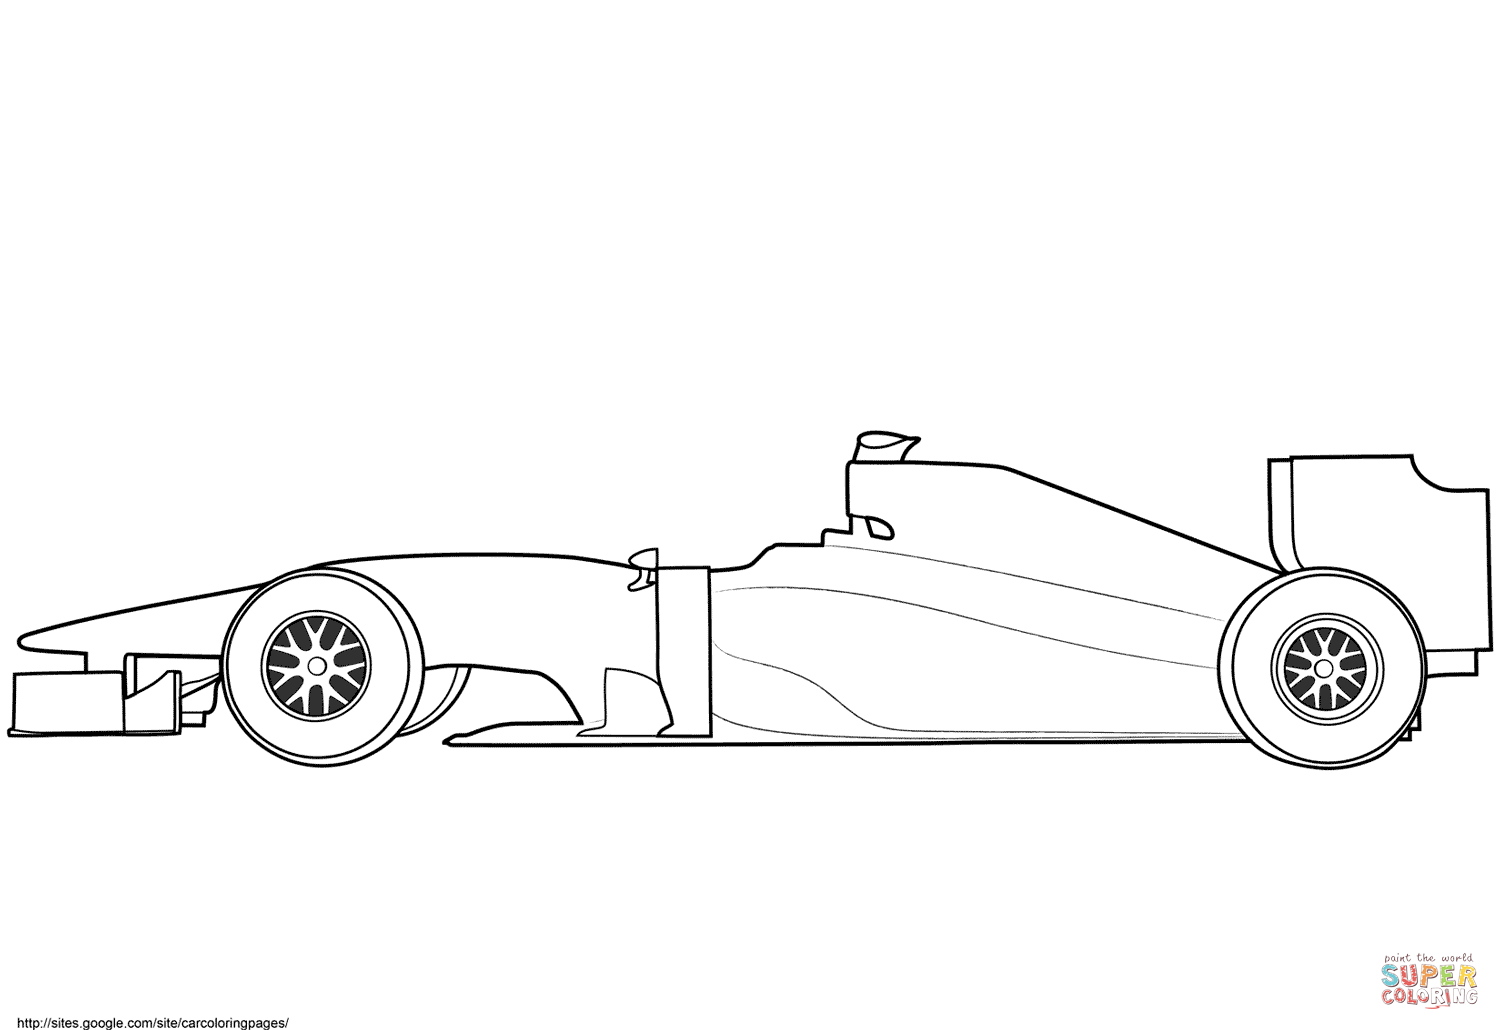 Blank Formula 1 Race Car Coloring Page | Free Printable Inside Blank Race Car Templates